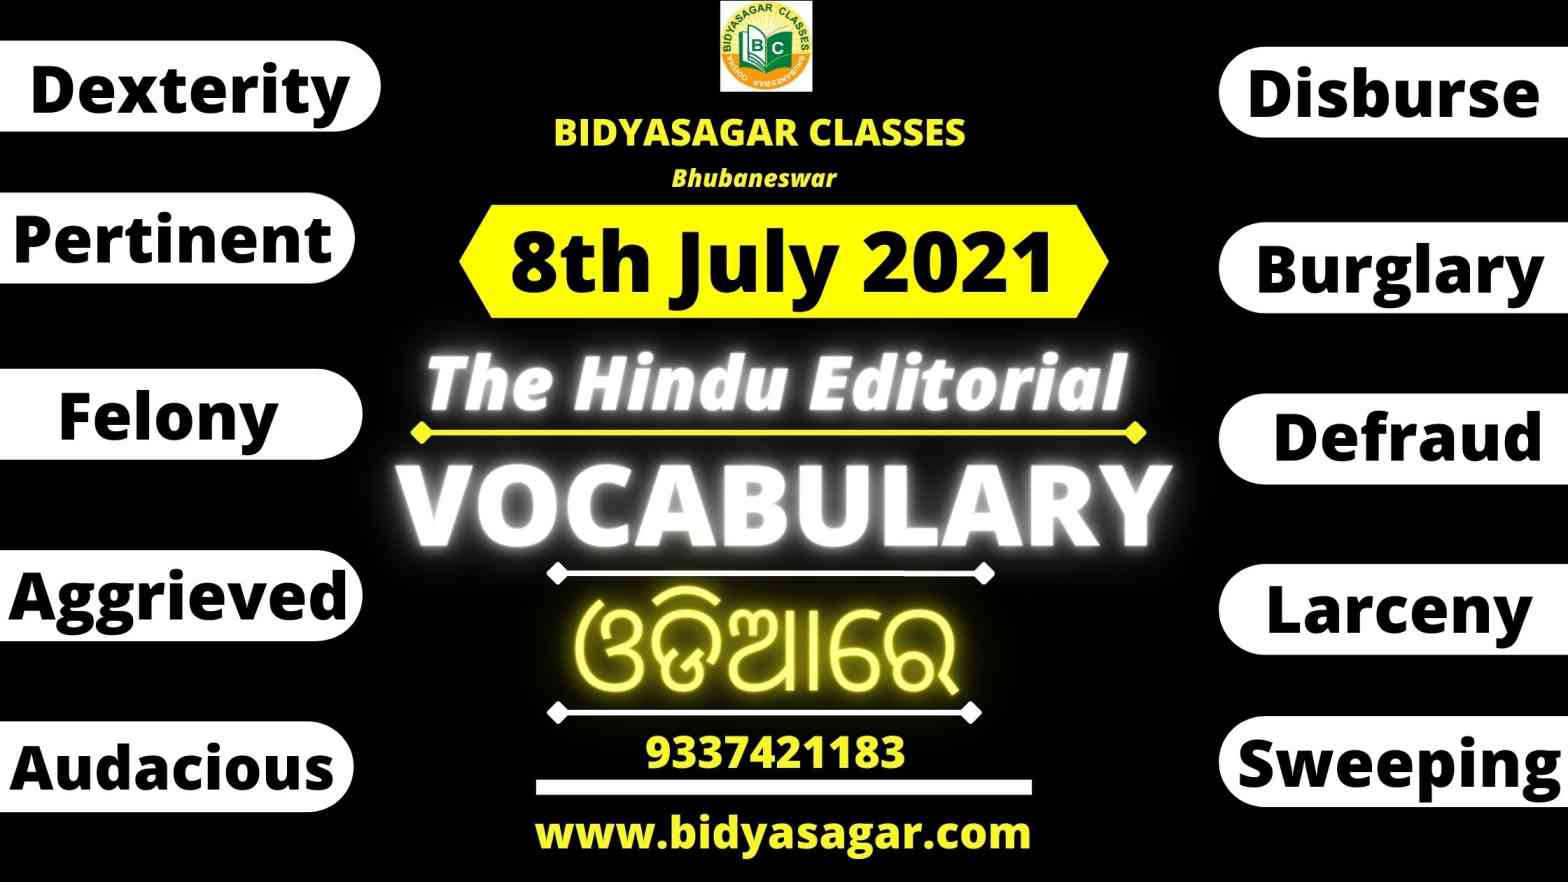 The Hindu Editorial Vocabulary of 8th July 2021